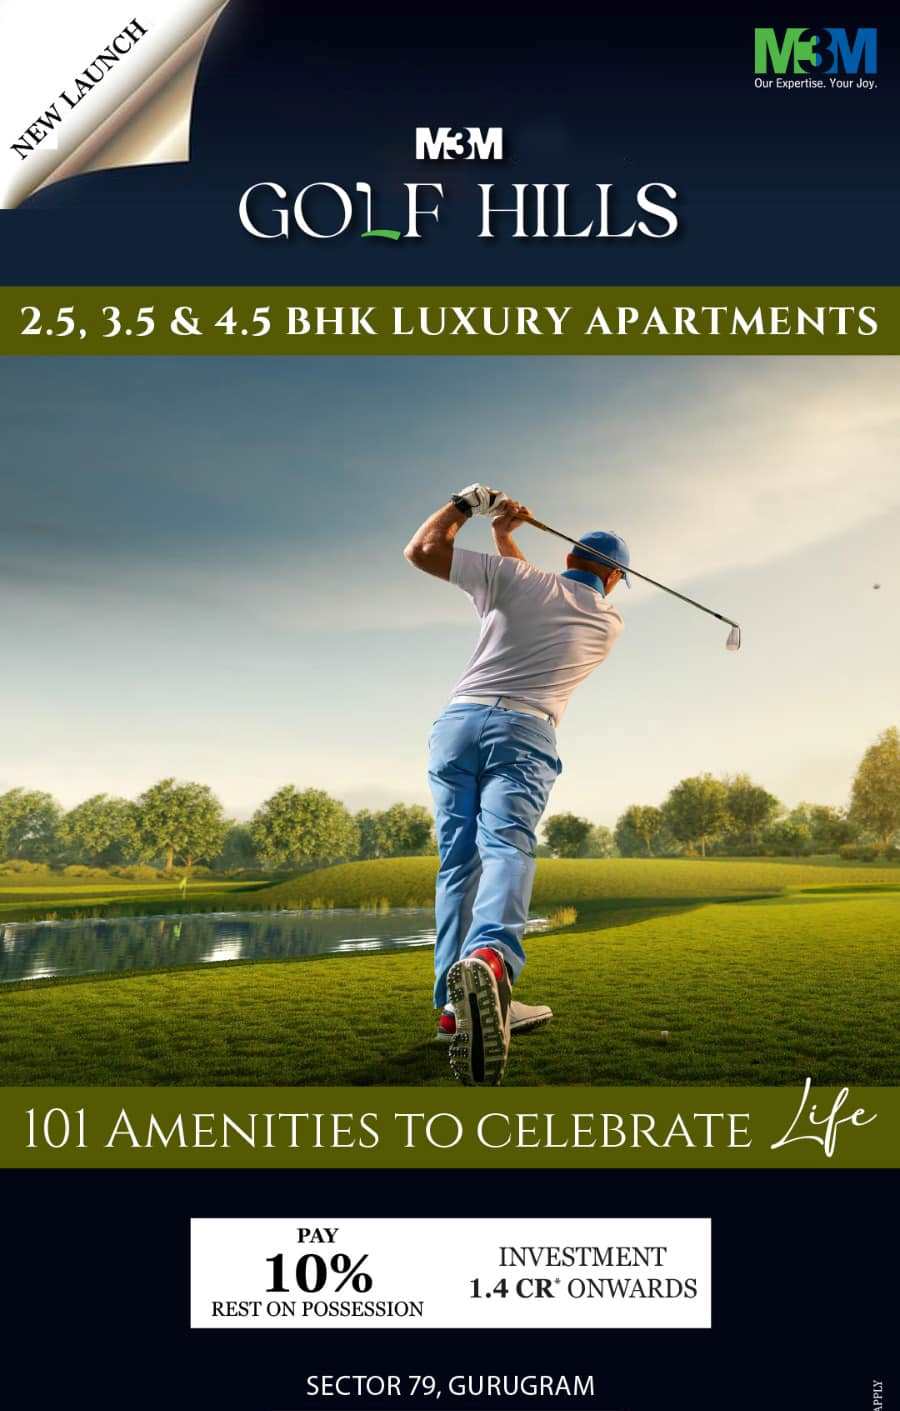 Pay 10% now and rest on possession at M3M Golf Estate Phase 2, Gurgaon Update